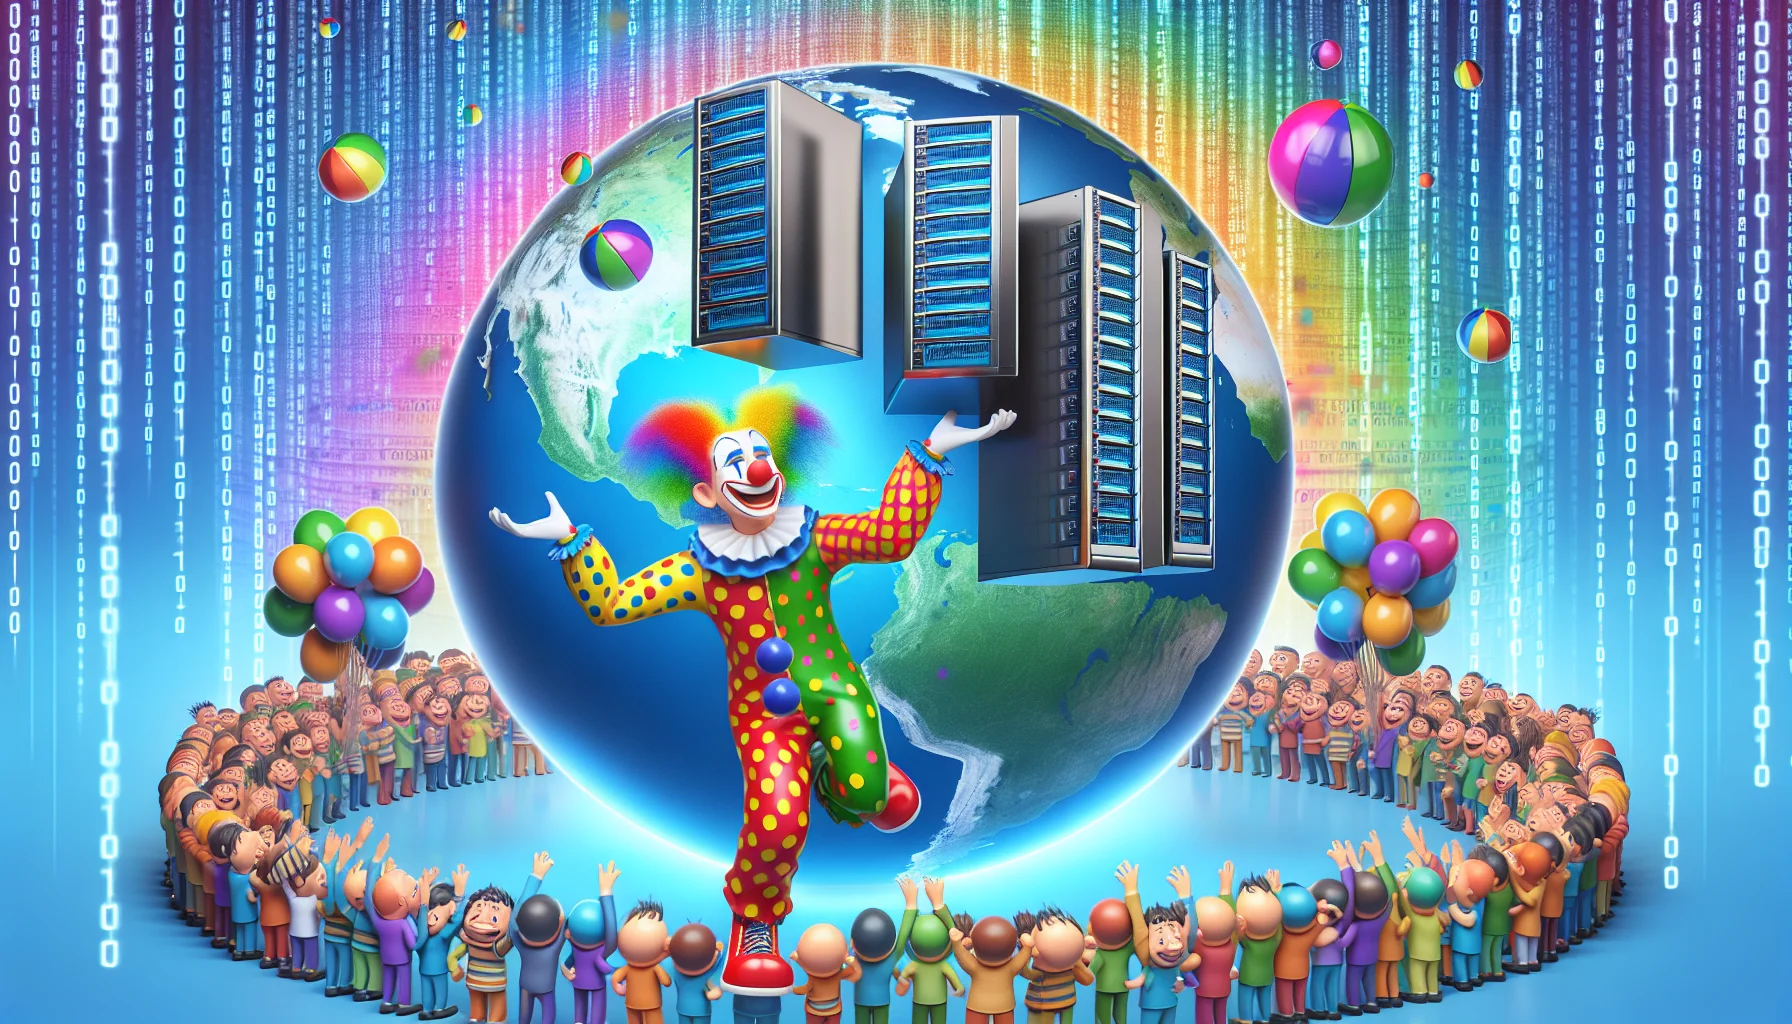 Generate a playful and humorous image that presents a hypothetical product in a web-hosting context. Imagine a bright, colorful clown playfully juggling shiny server racks while standing on a giant world-wide-web styled globe. A crowd of cartoons with gleeful faces are all pointing towards the juggler, attracted by the spectacle. Around the edges of the image, vibrant binary code flows like a river, symbolizing the seamless data transmission. Make sure that there are no specific brand references in this image.